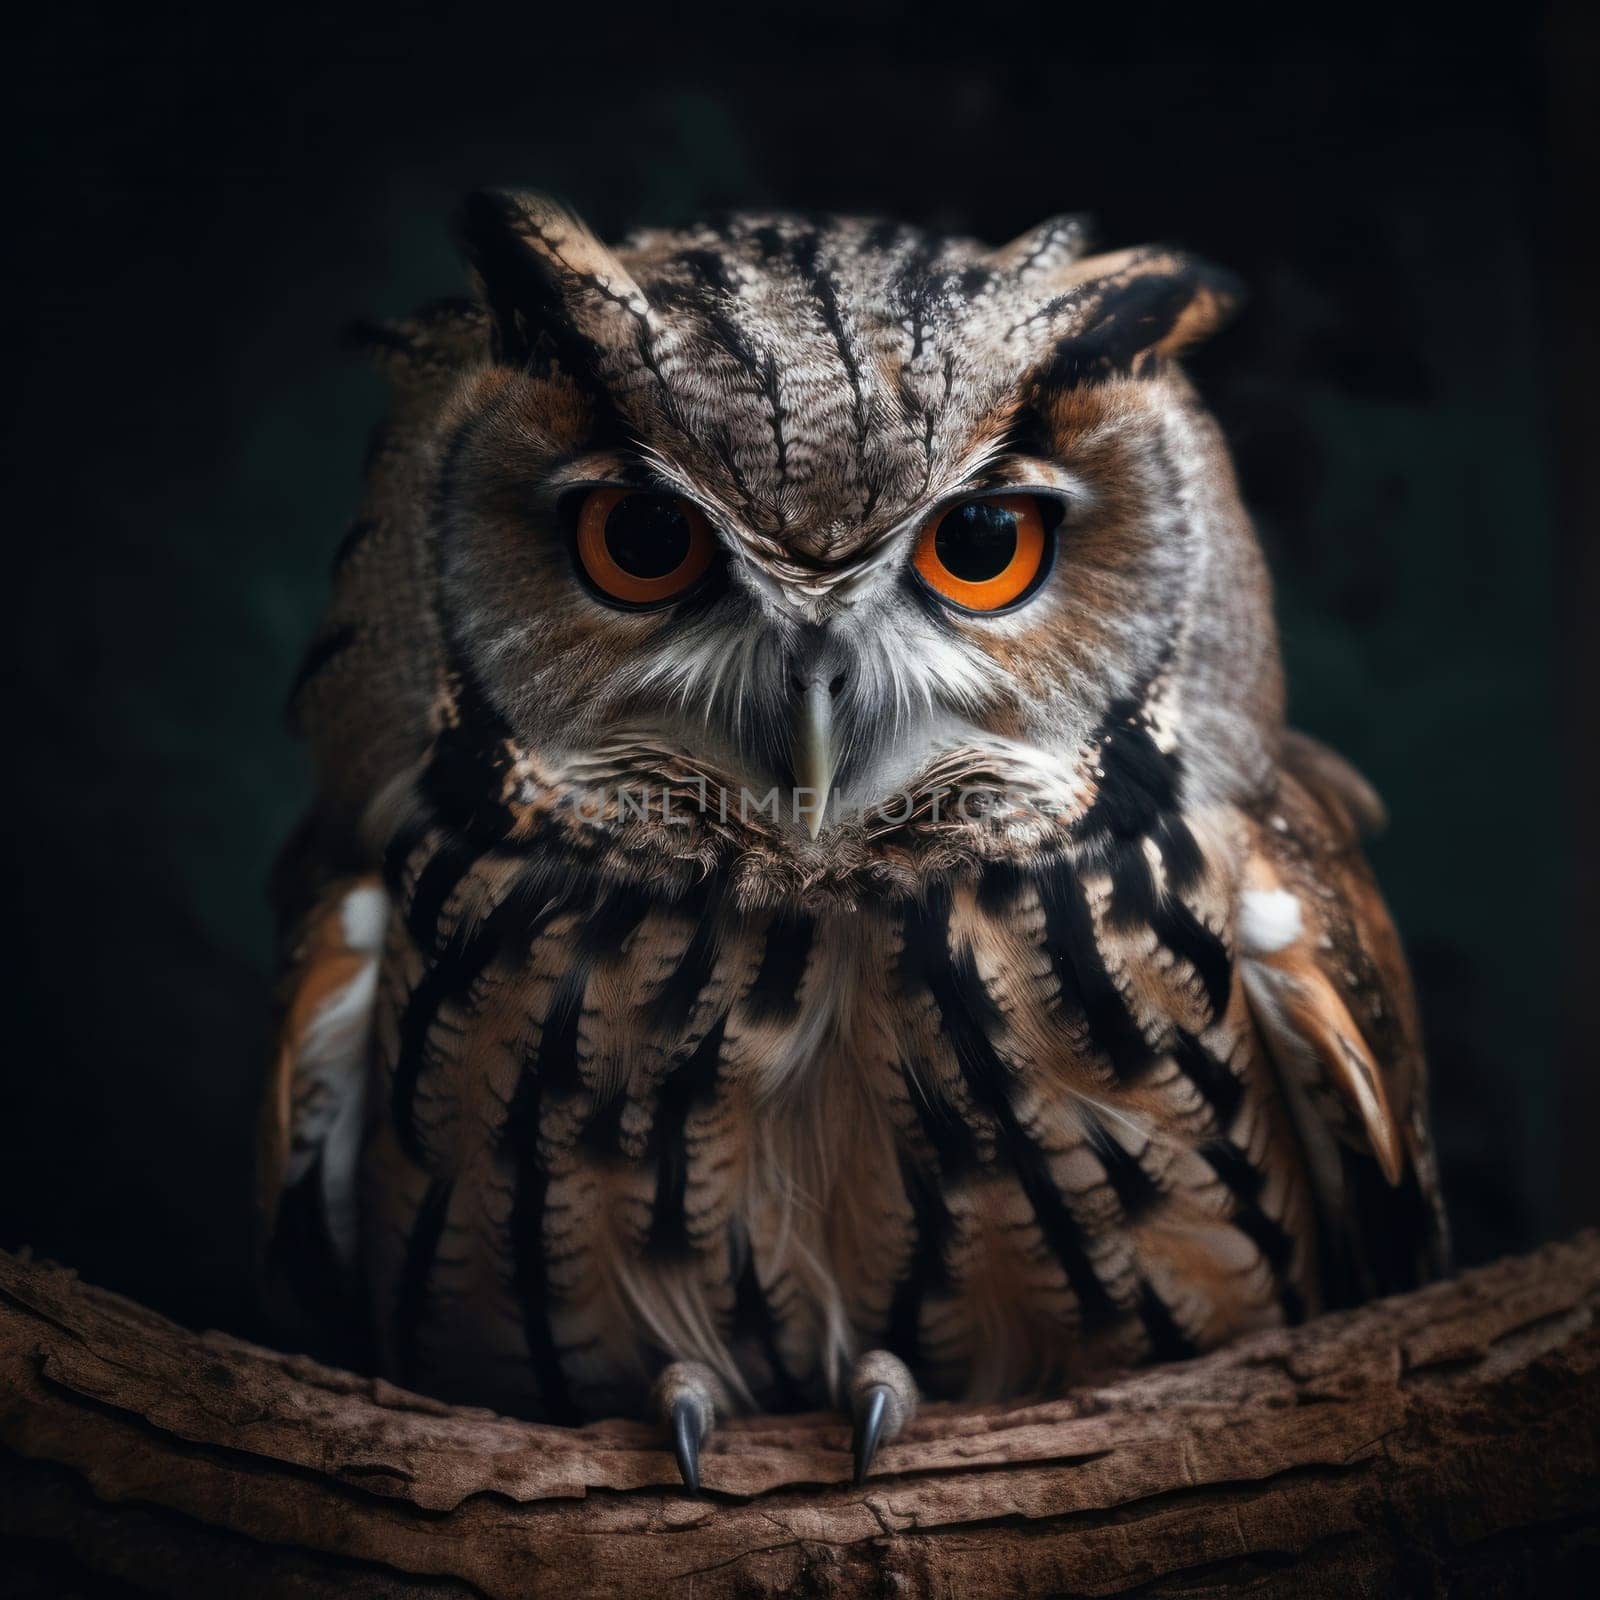 A stunning nocturnal predator, an owl perched on the ground in the woods by Sorapop